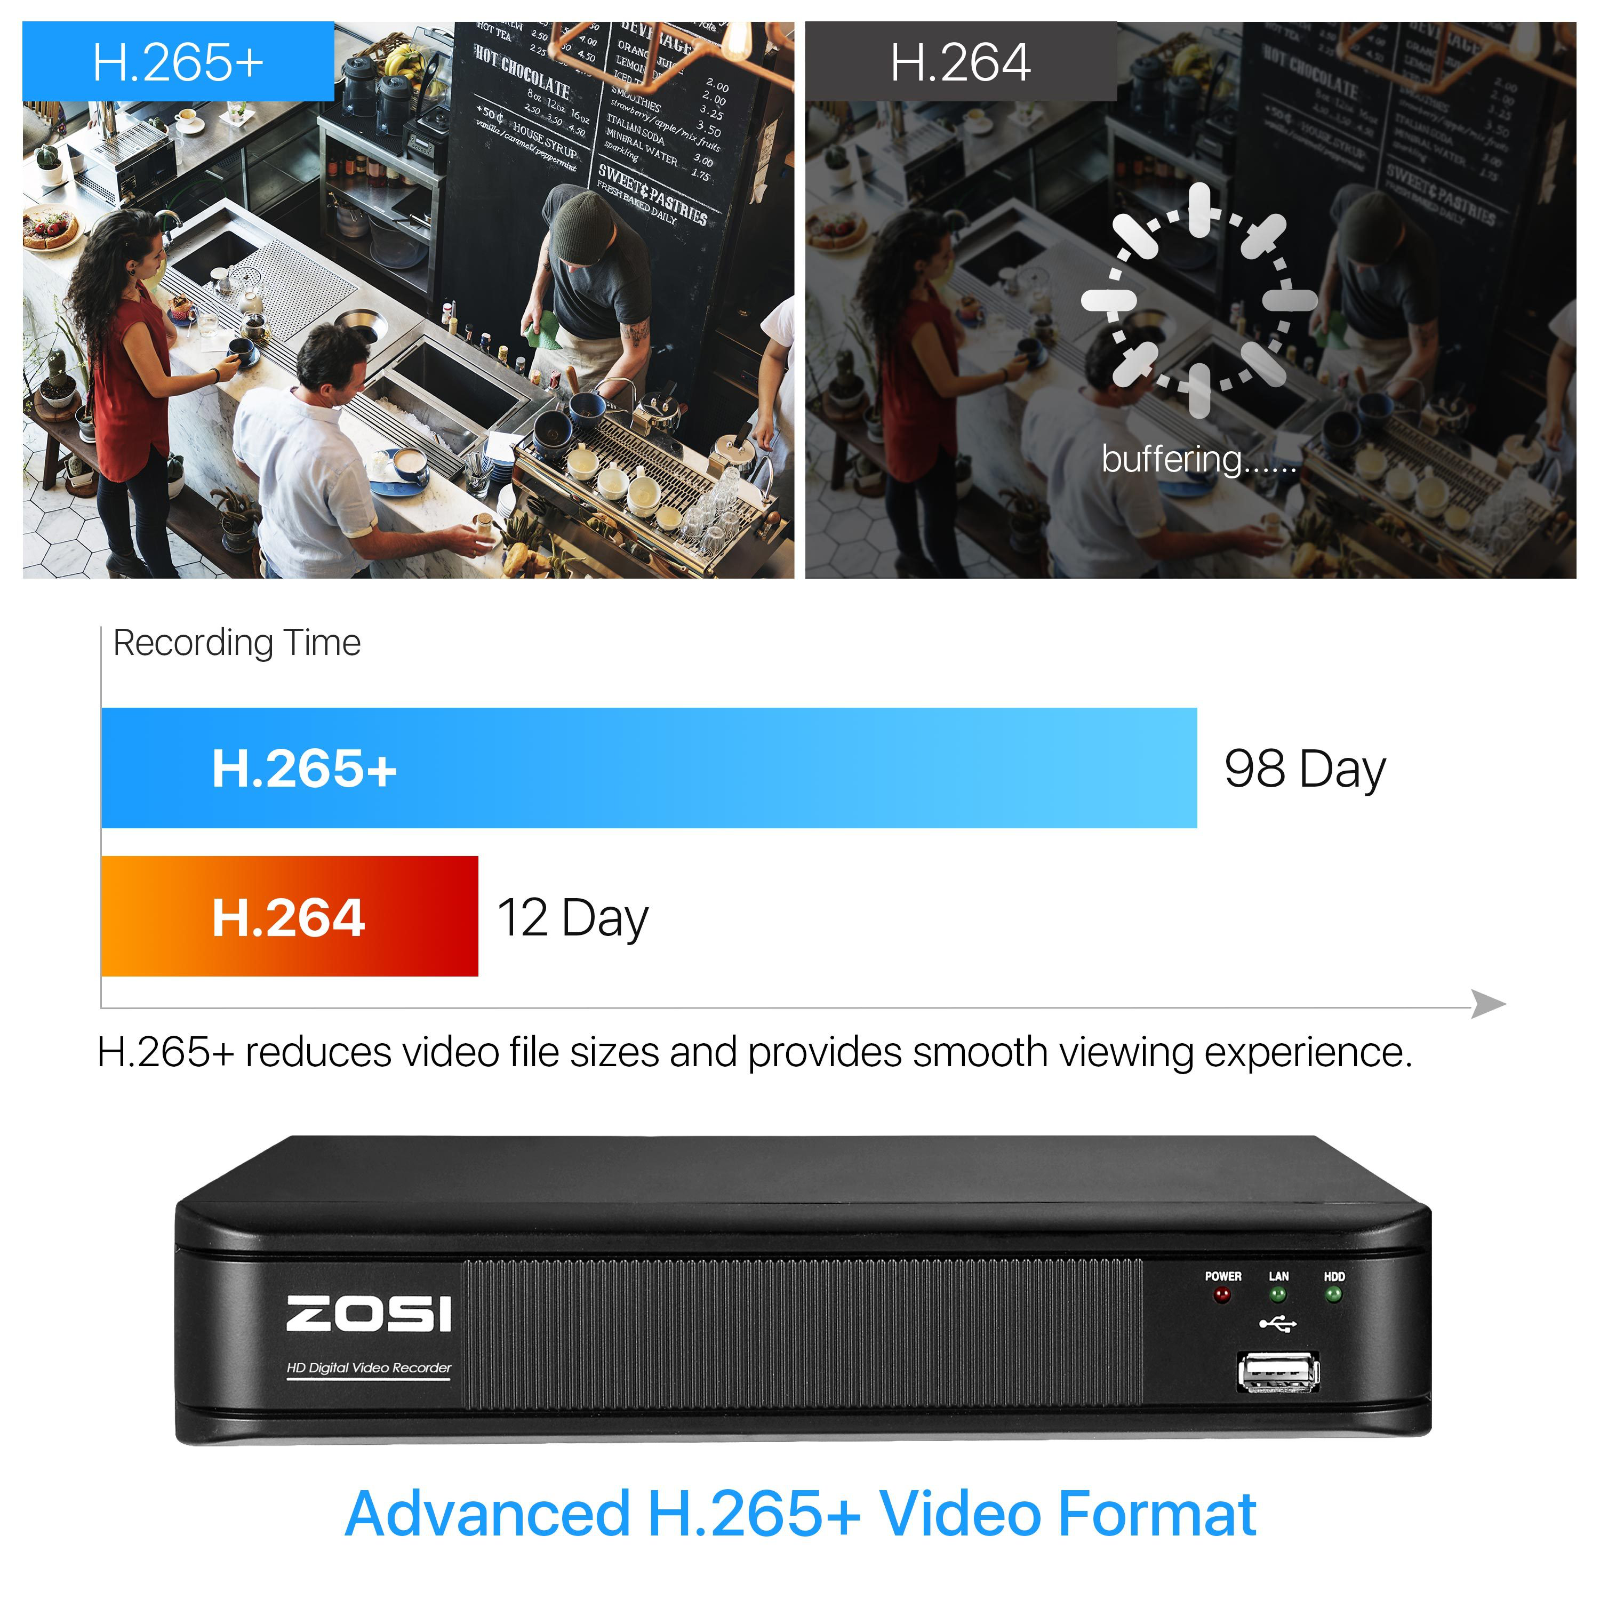 ZOSI H.265+ 1080P HDMI 8 Channel DVR 1500TVL Outdoor CCTV Security Camera System ZOSI Does Not Apply - фотография #5